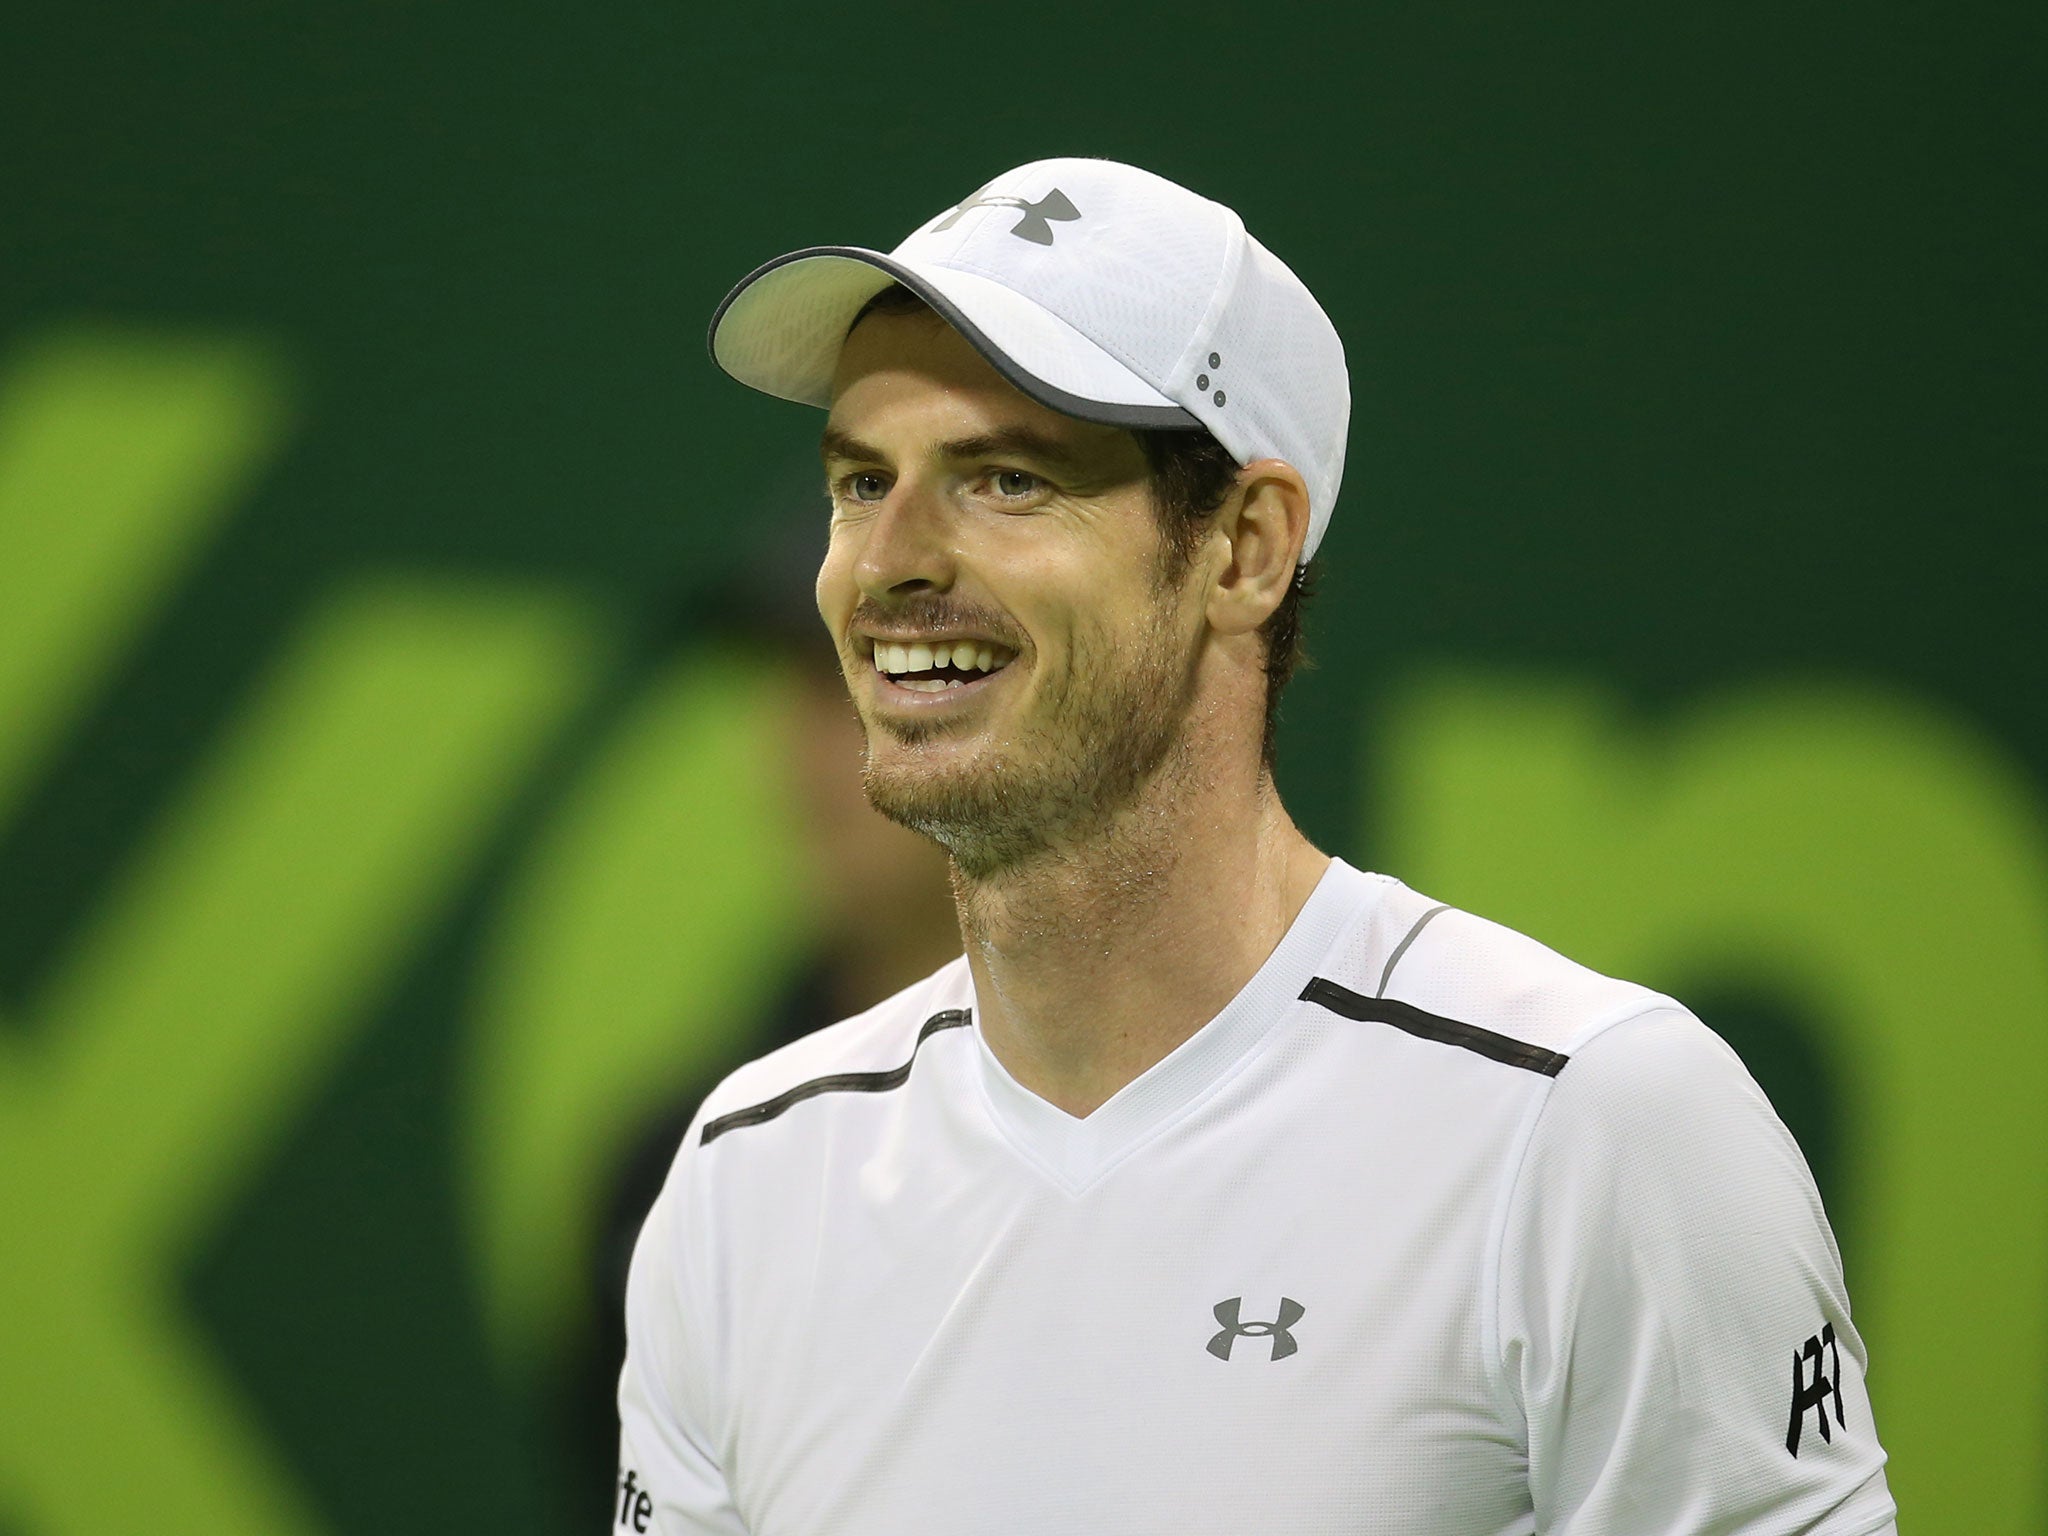 Andy Murray is looking to claim his first major as world No 1 in Melbourne